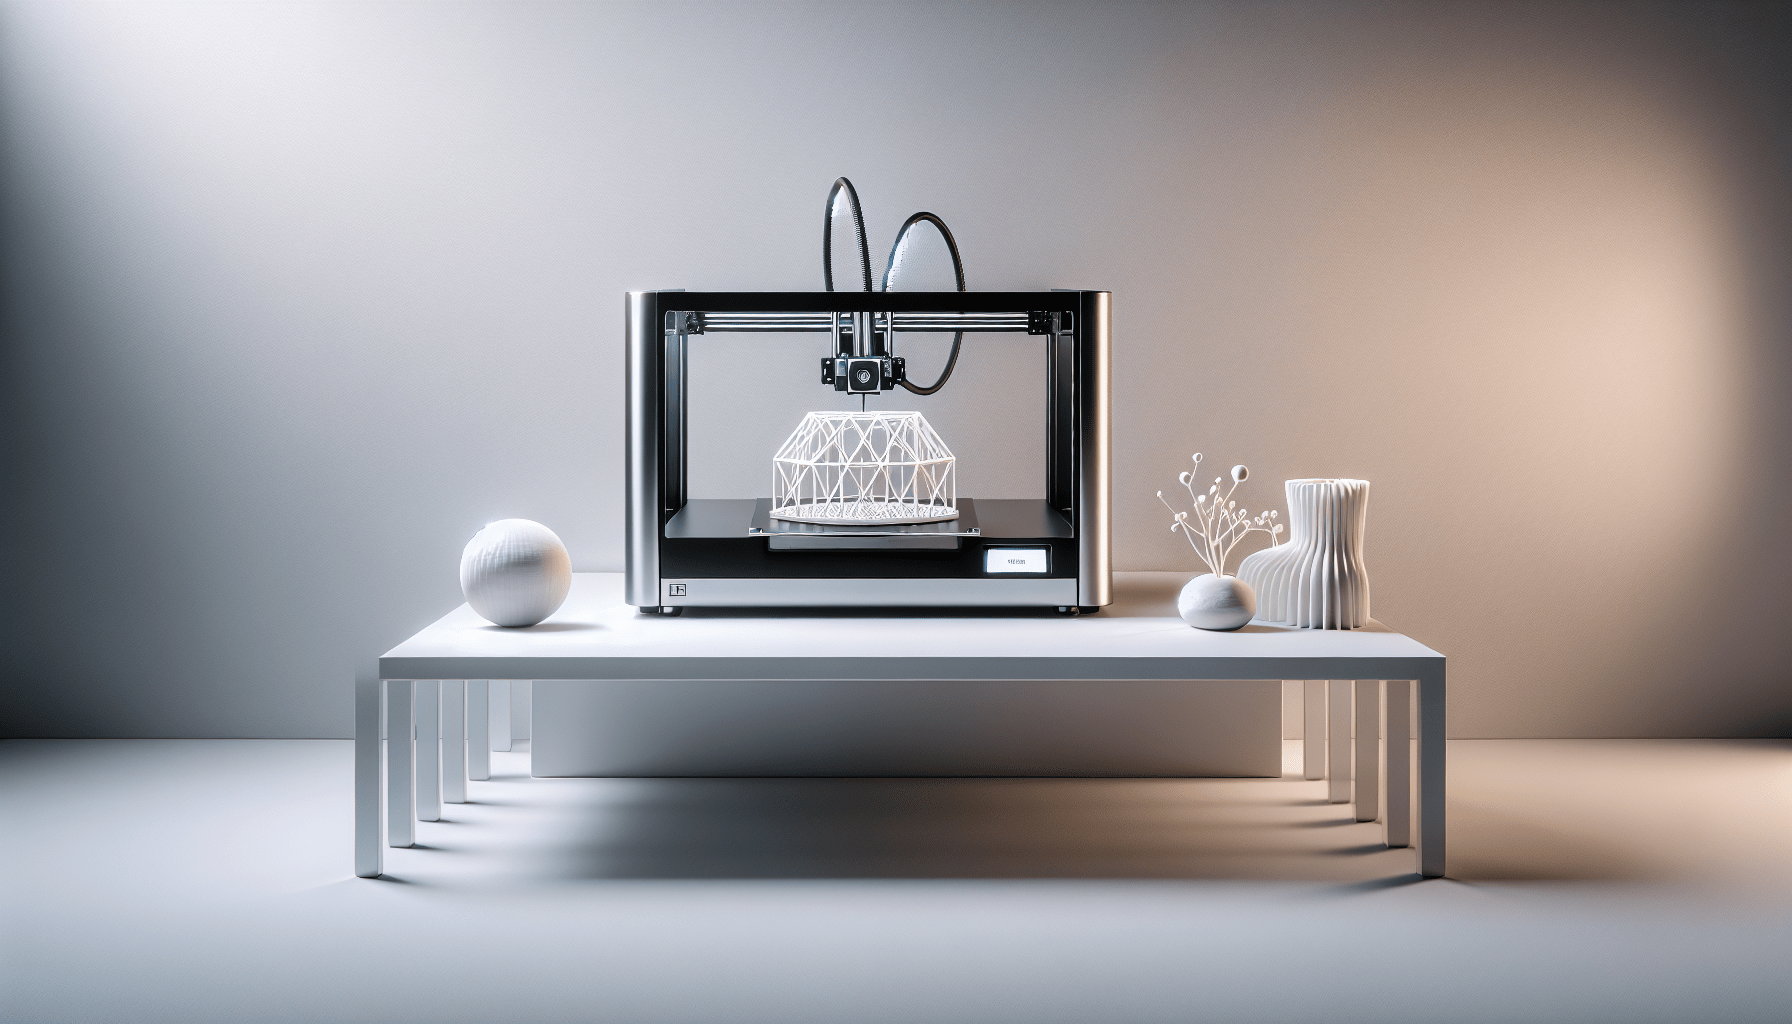 is-3d-printing-a-revolution-or-just-a-trend-1 Is 3D Printing a Revolution or Just a Trend?